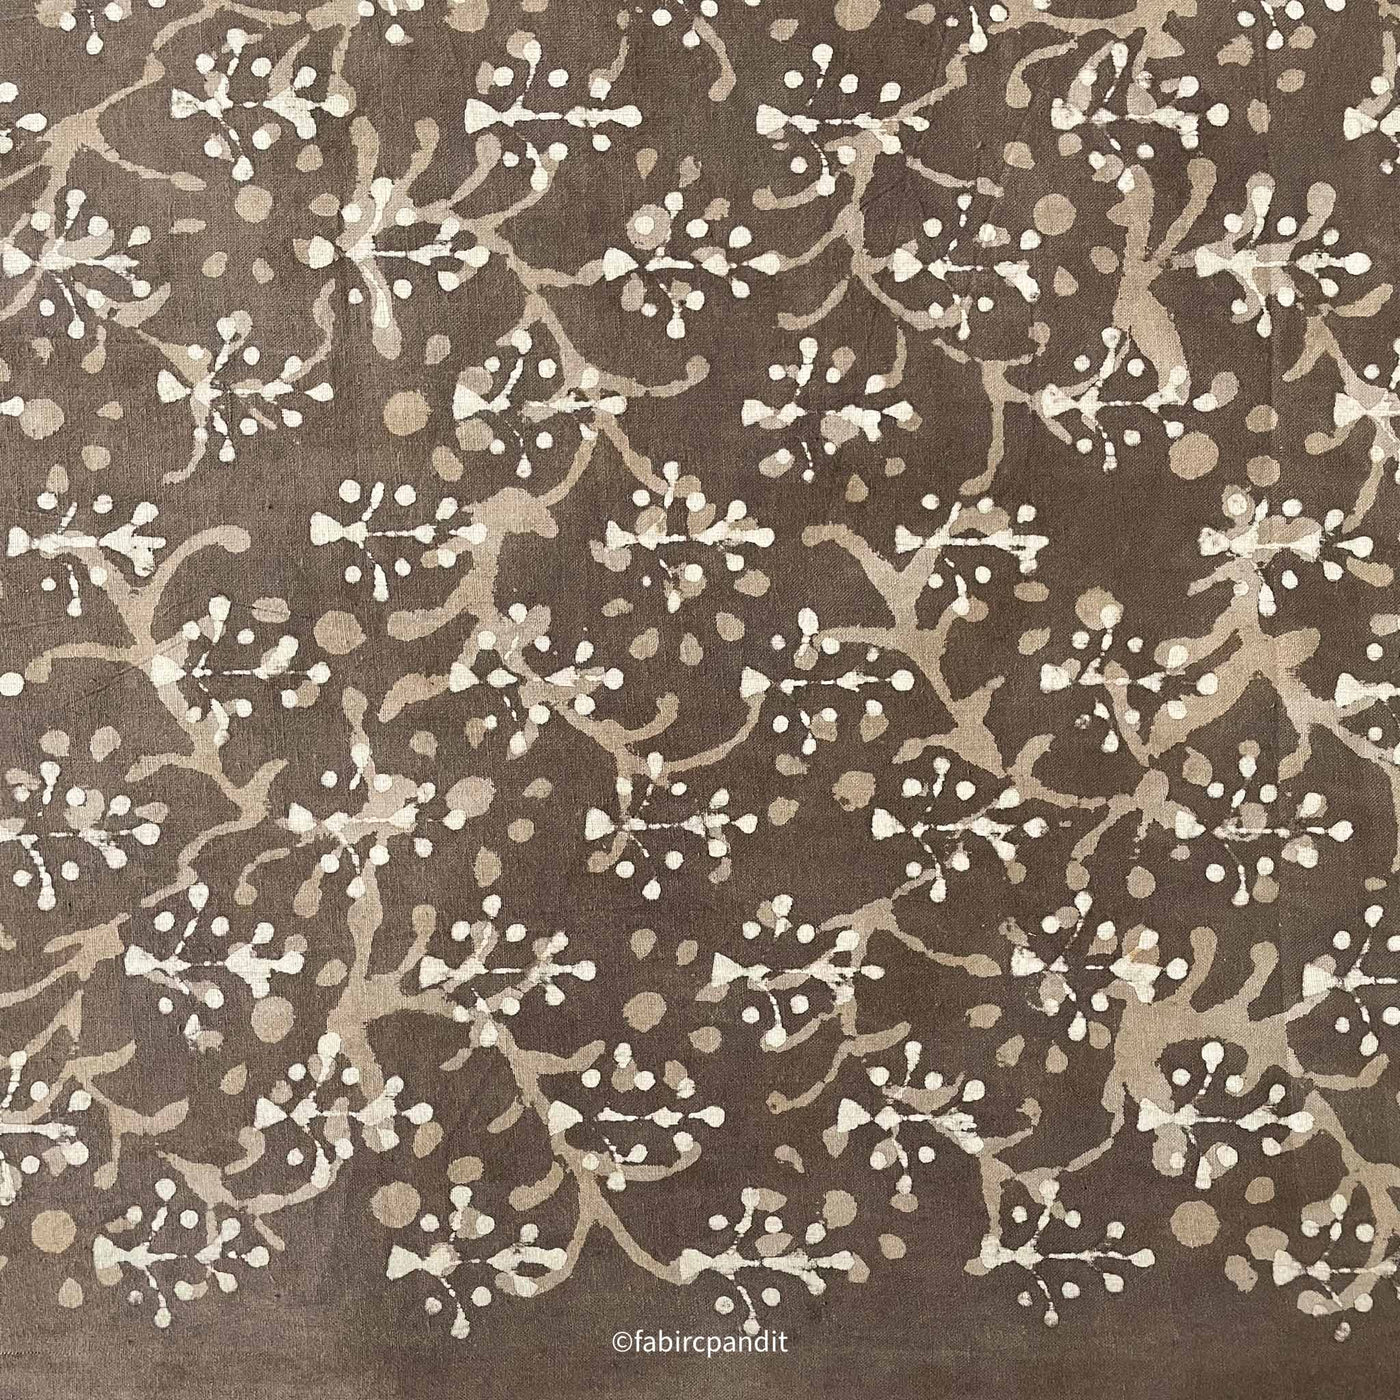 Fabric Pandit Cut Piece (Cut Piece) Brown Indigo Dabu Natural Dyed Abstract & Floral Pattern Hand Block Printed Cotton Fabric (Width 43 inches)